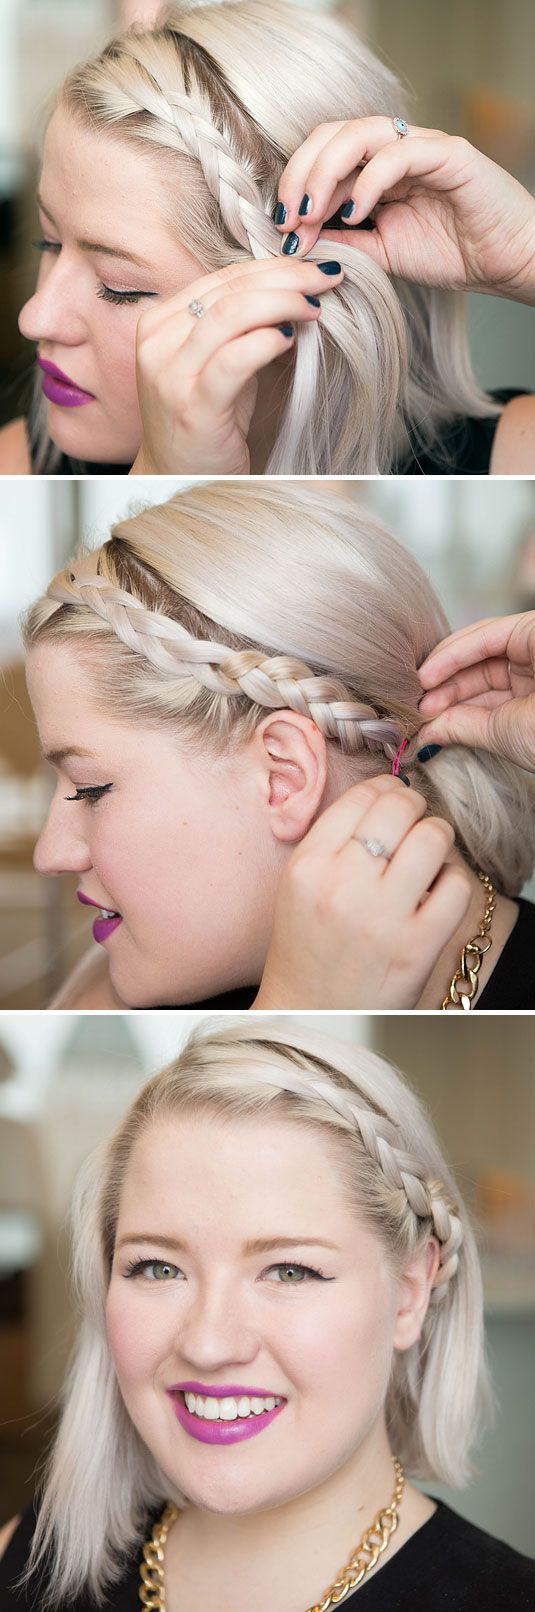 The Best Hair Accessories for Women: Pins, Barrettes